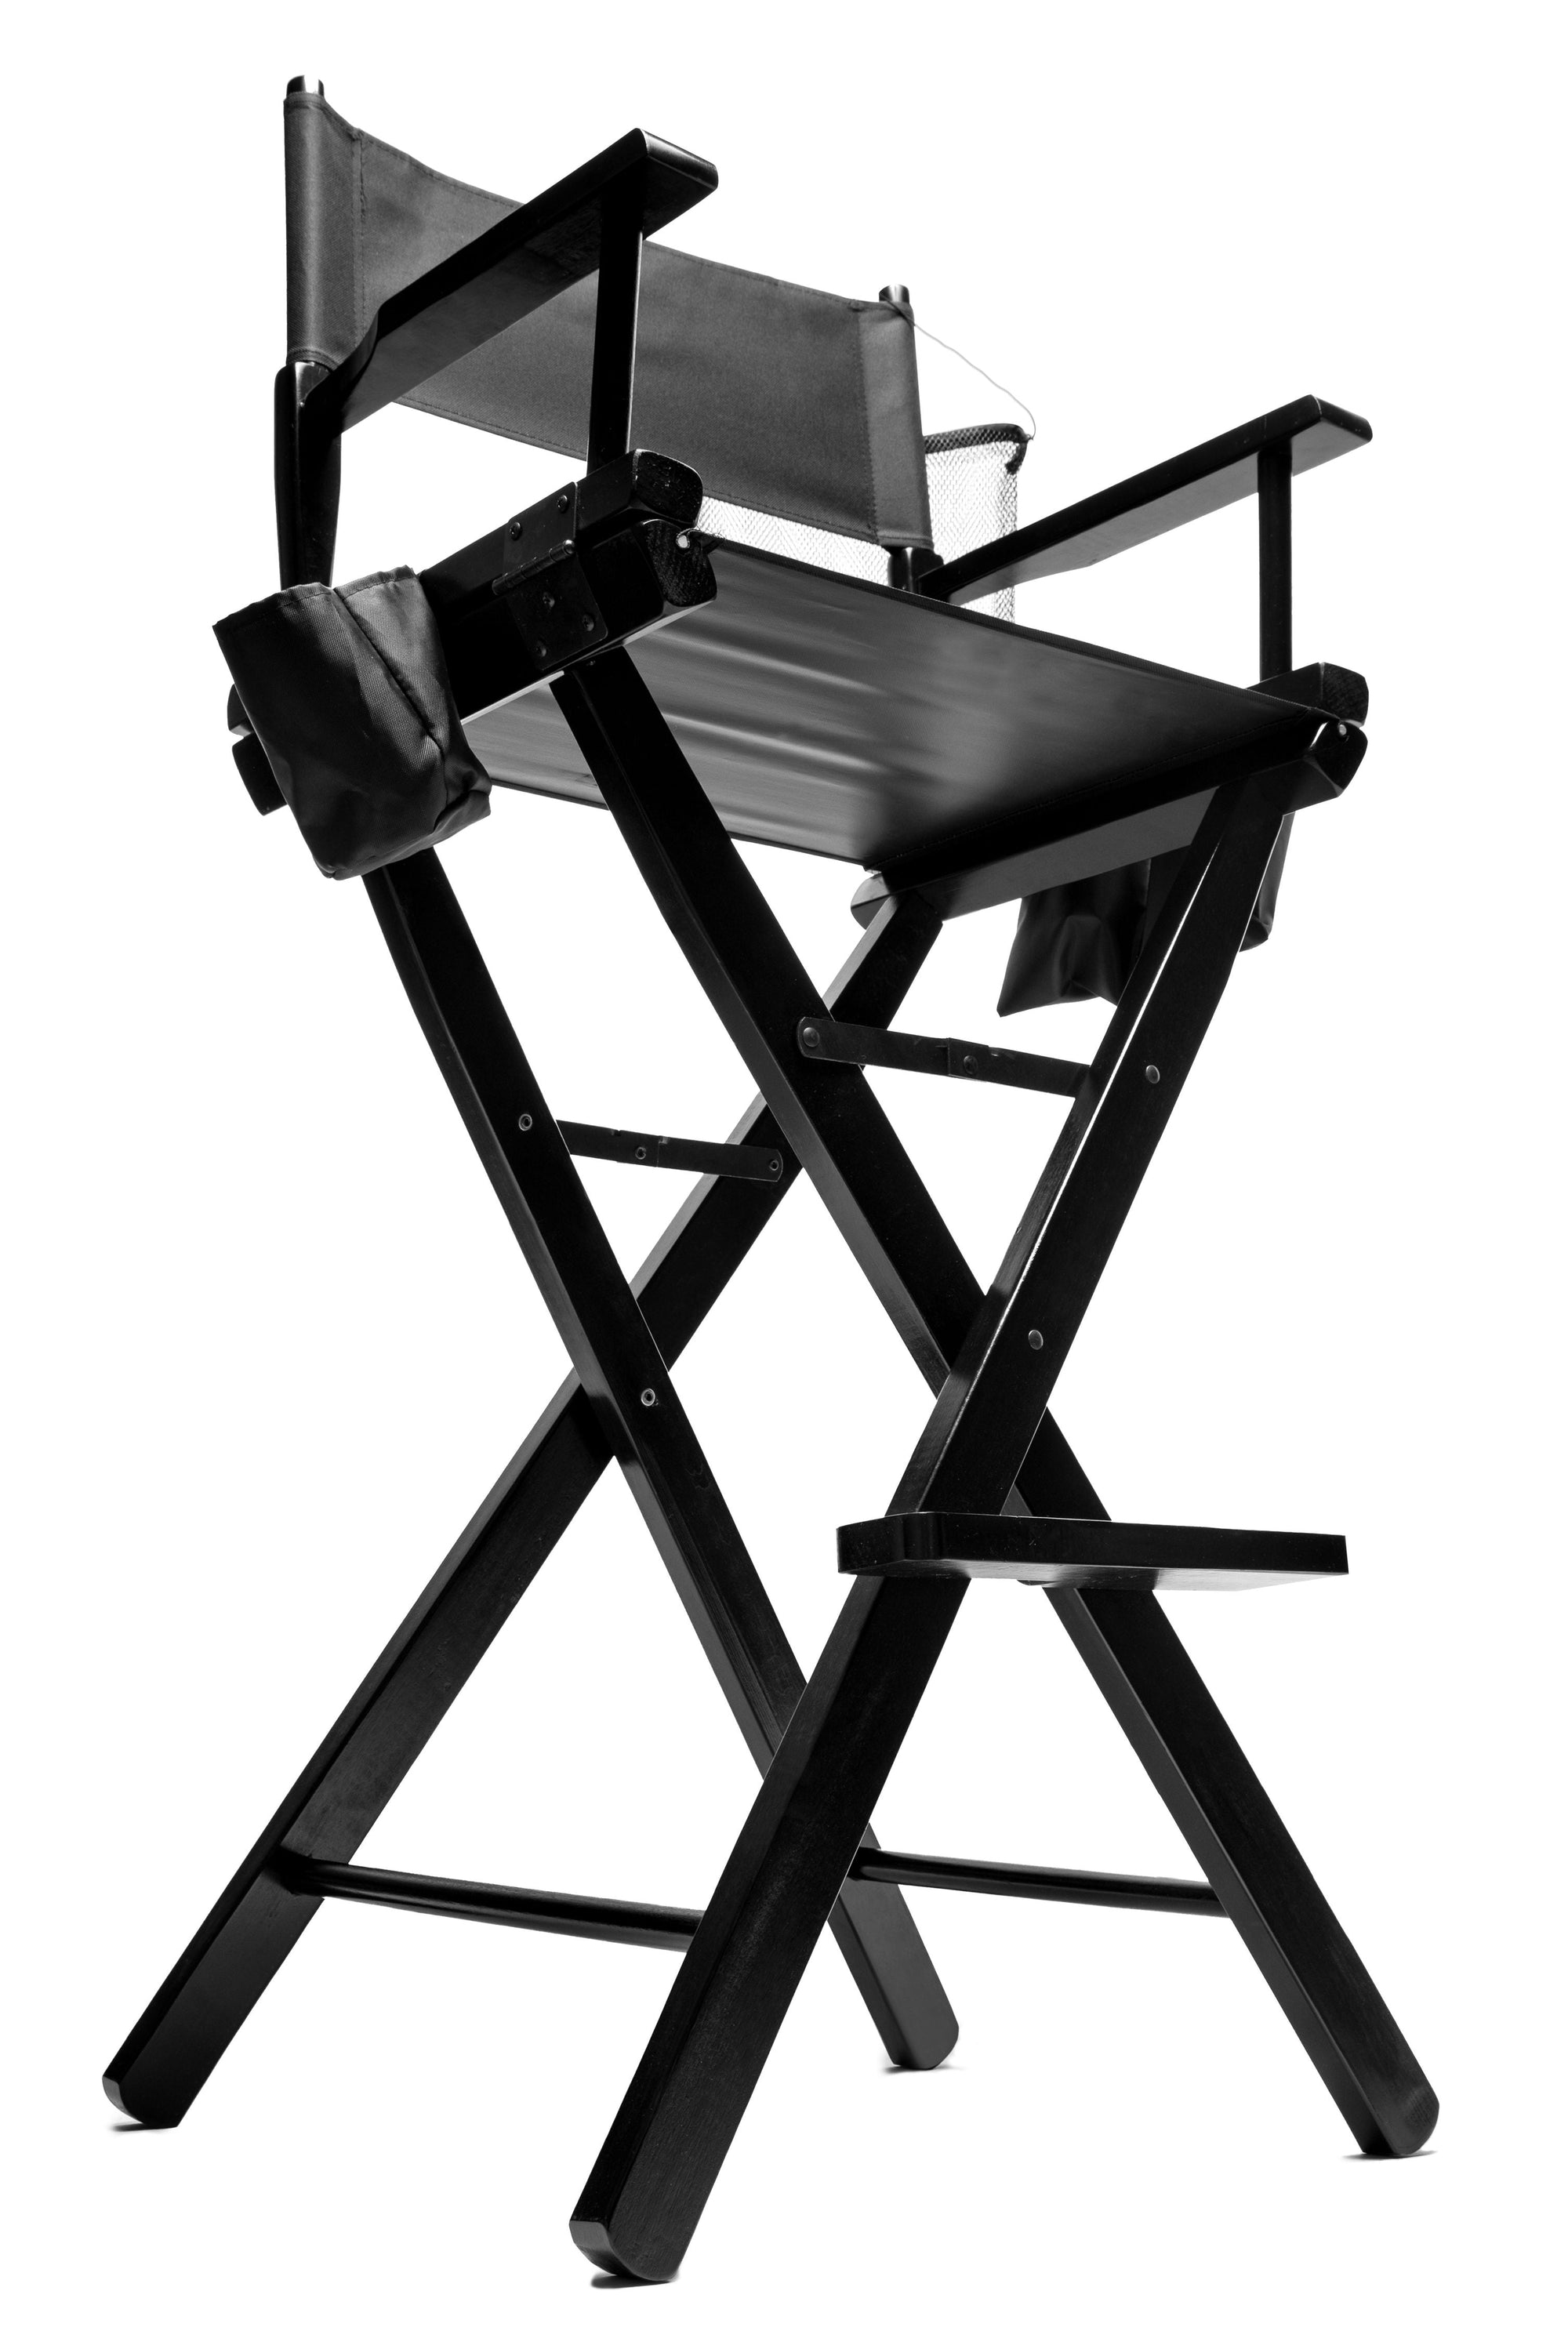 angled view of professional make up artists chair showing snag resistant wipe clean fabric seat and legs of chair